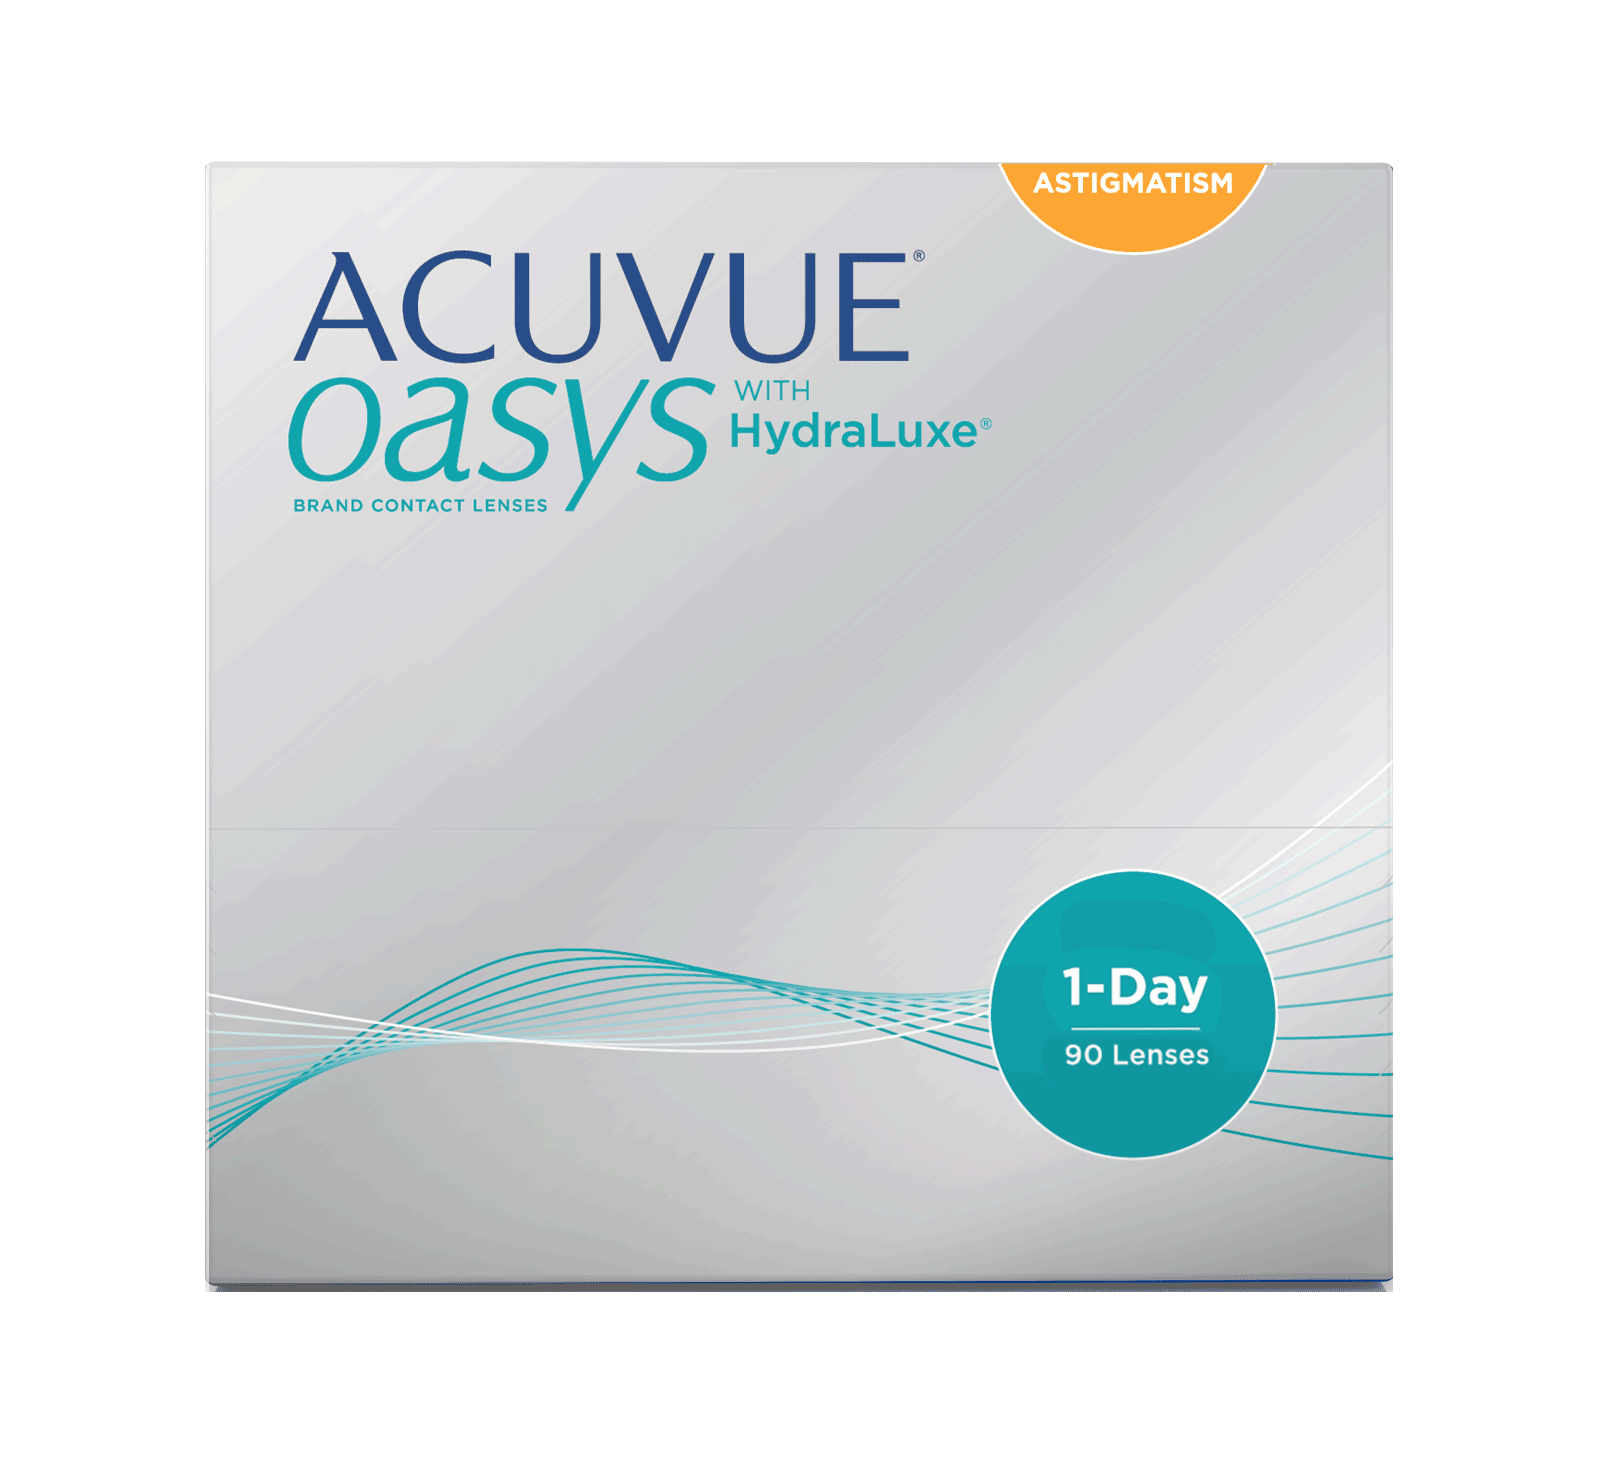 https://covalentcareers3.s3.amazonaws.com/media/original_images/acuvue-oasys-for-astigmatism.png